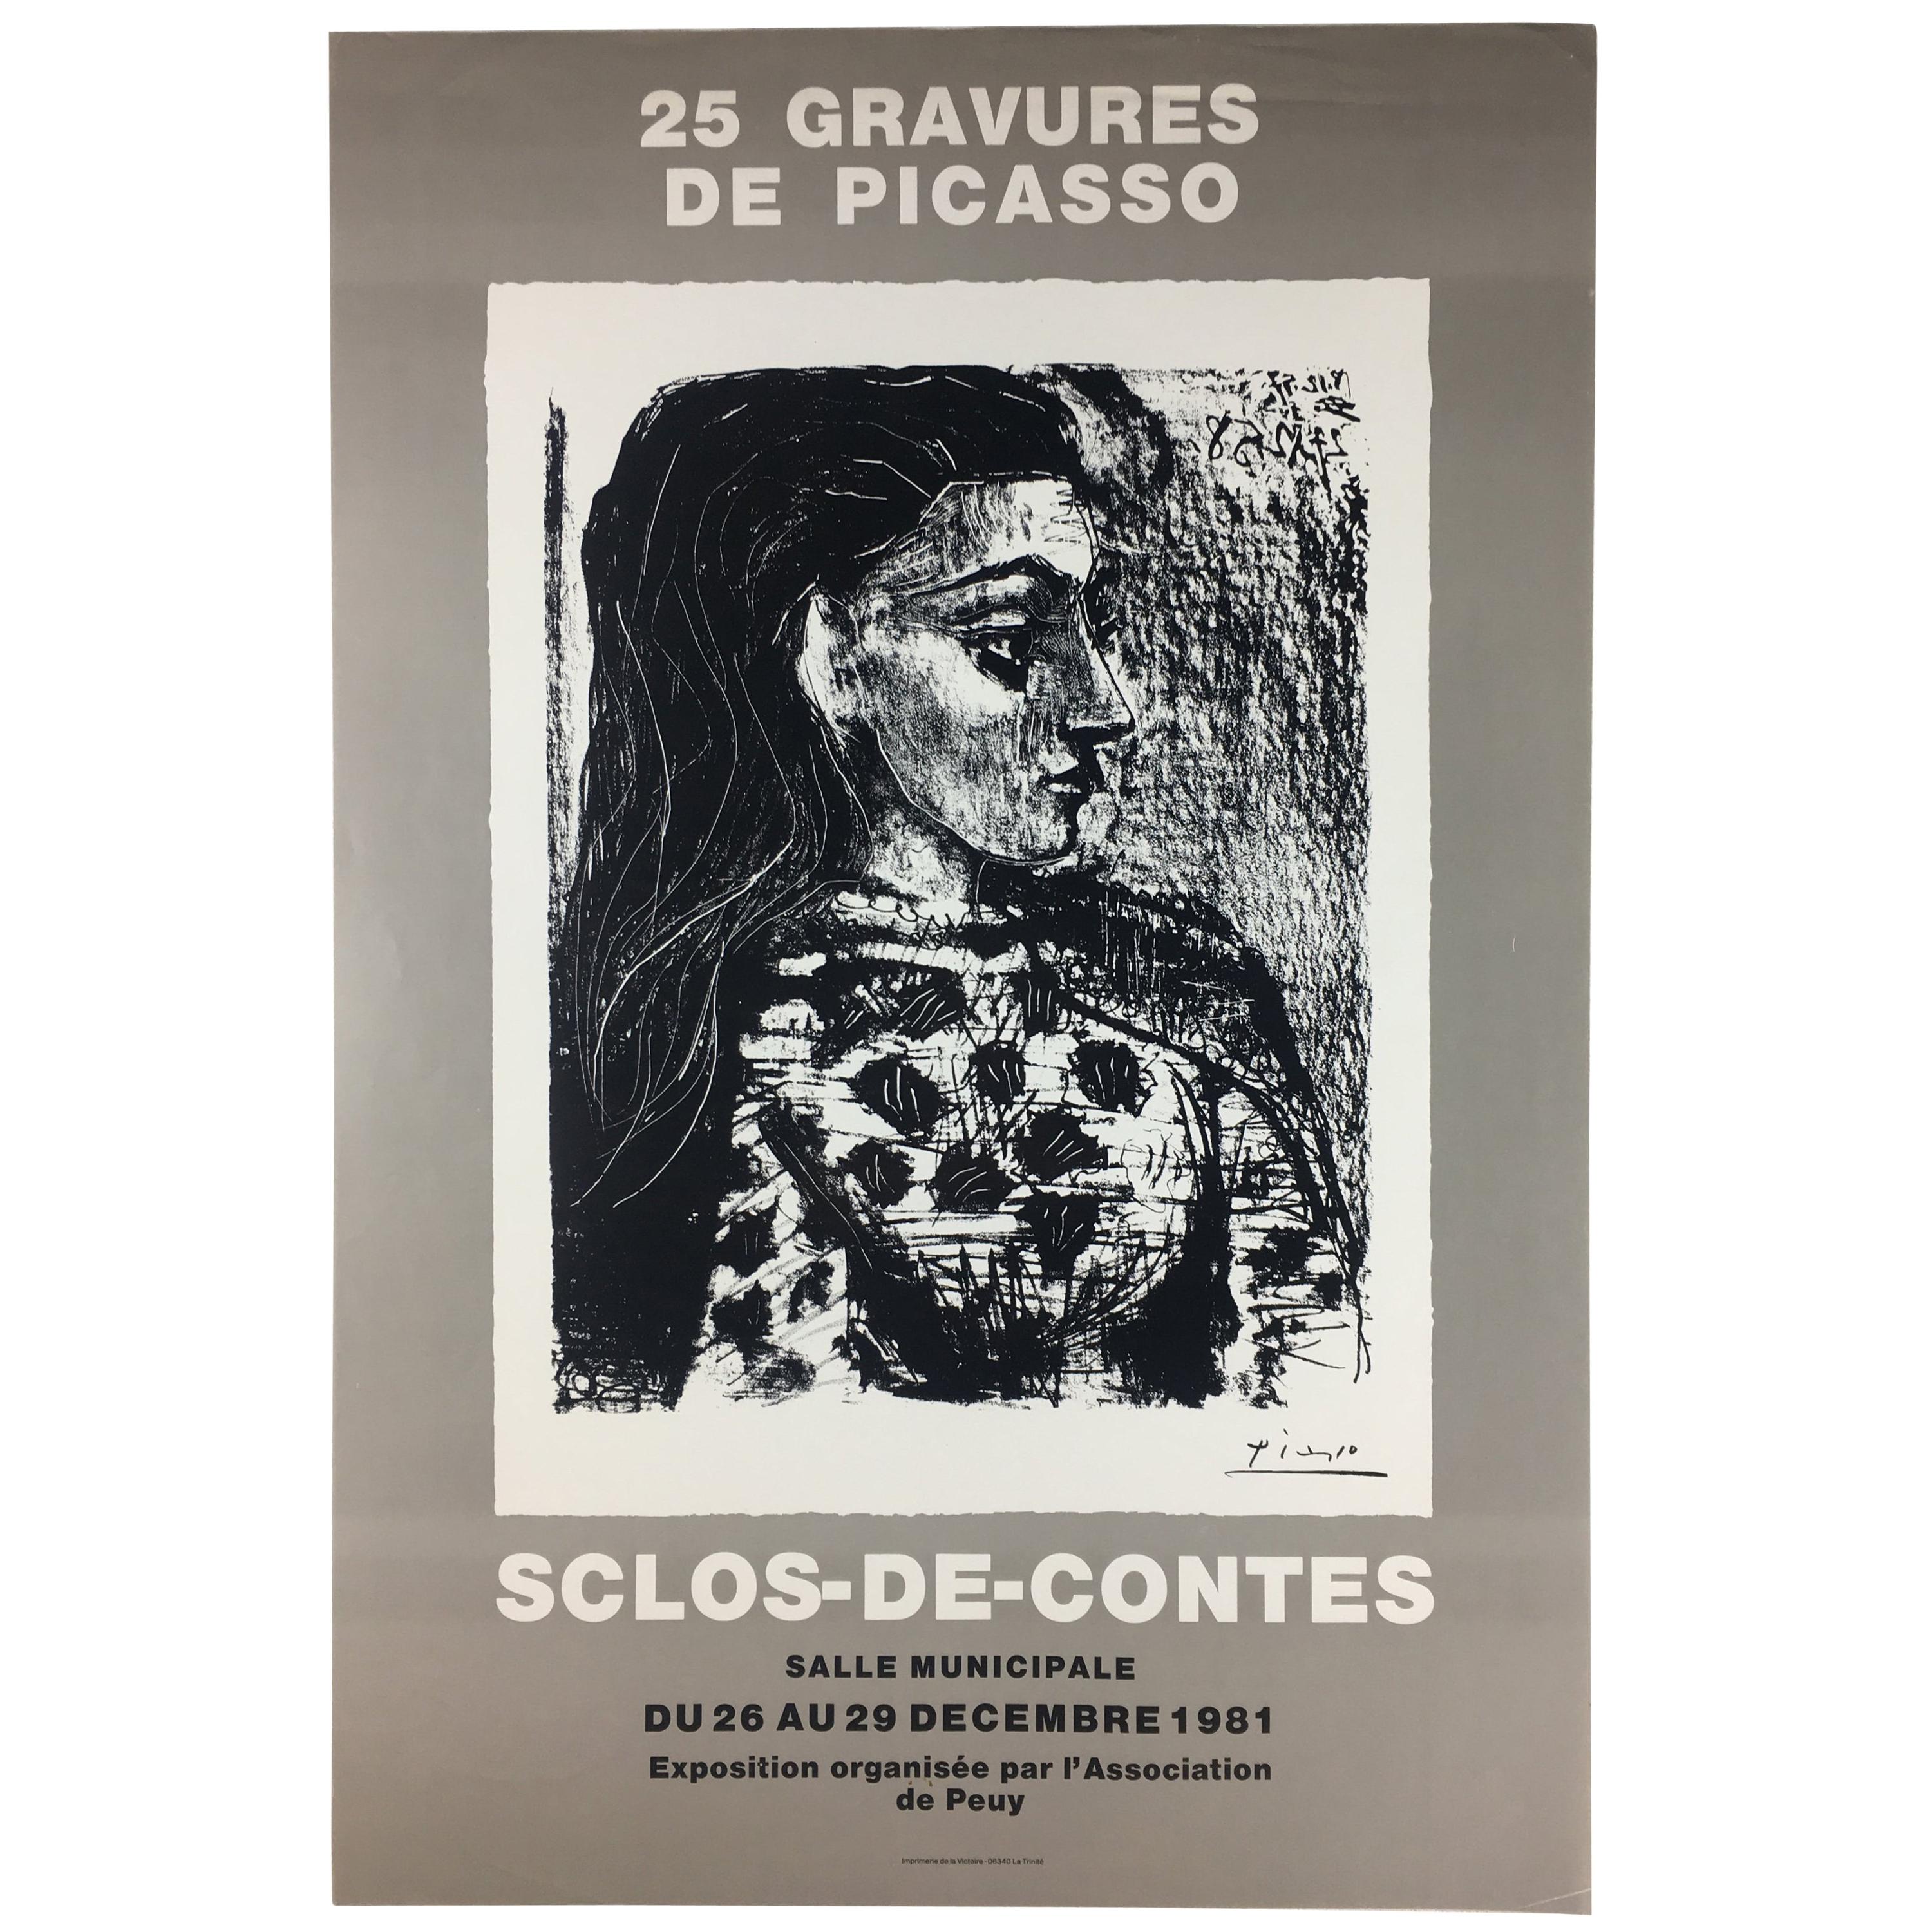 Original French Art Exhibition Poster, Picasso